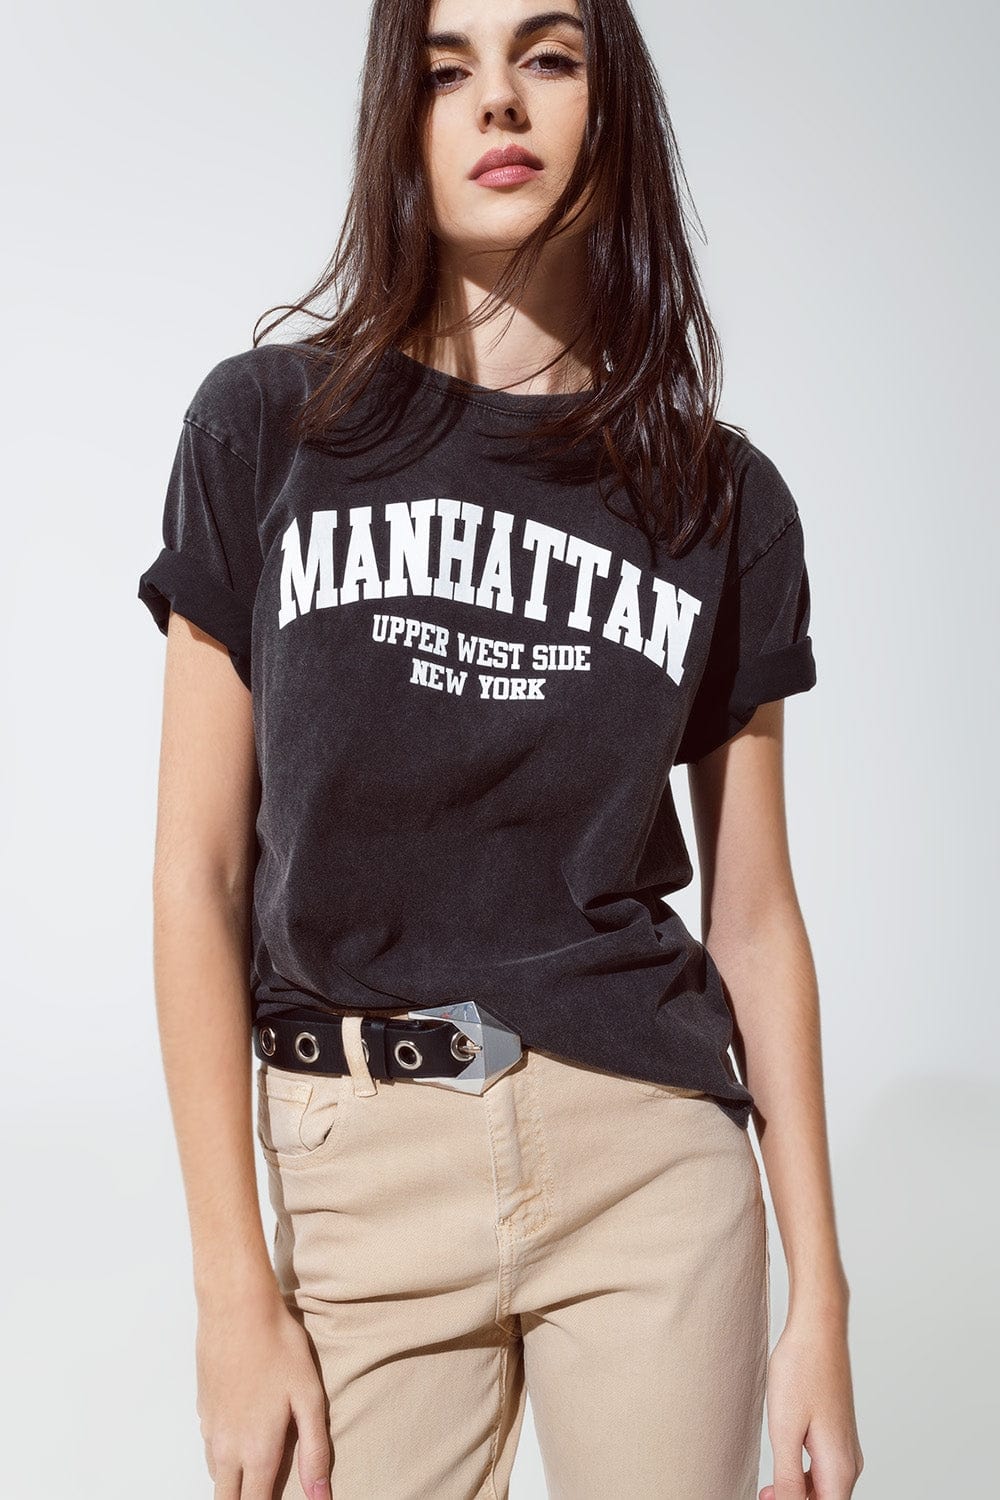 Q2 Women's Tees & Tanks One Size / Black Short Sleeve T-Shirt With Graphic Text Manhattan In The Front In Vintage Black